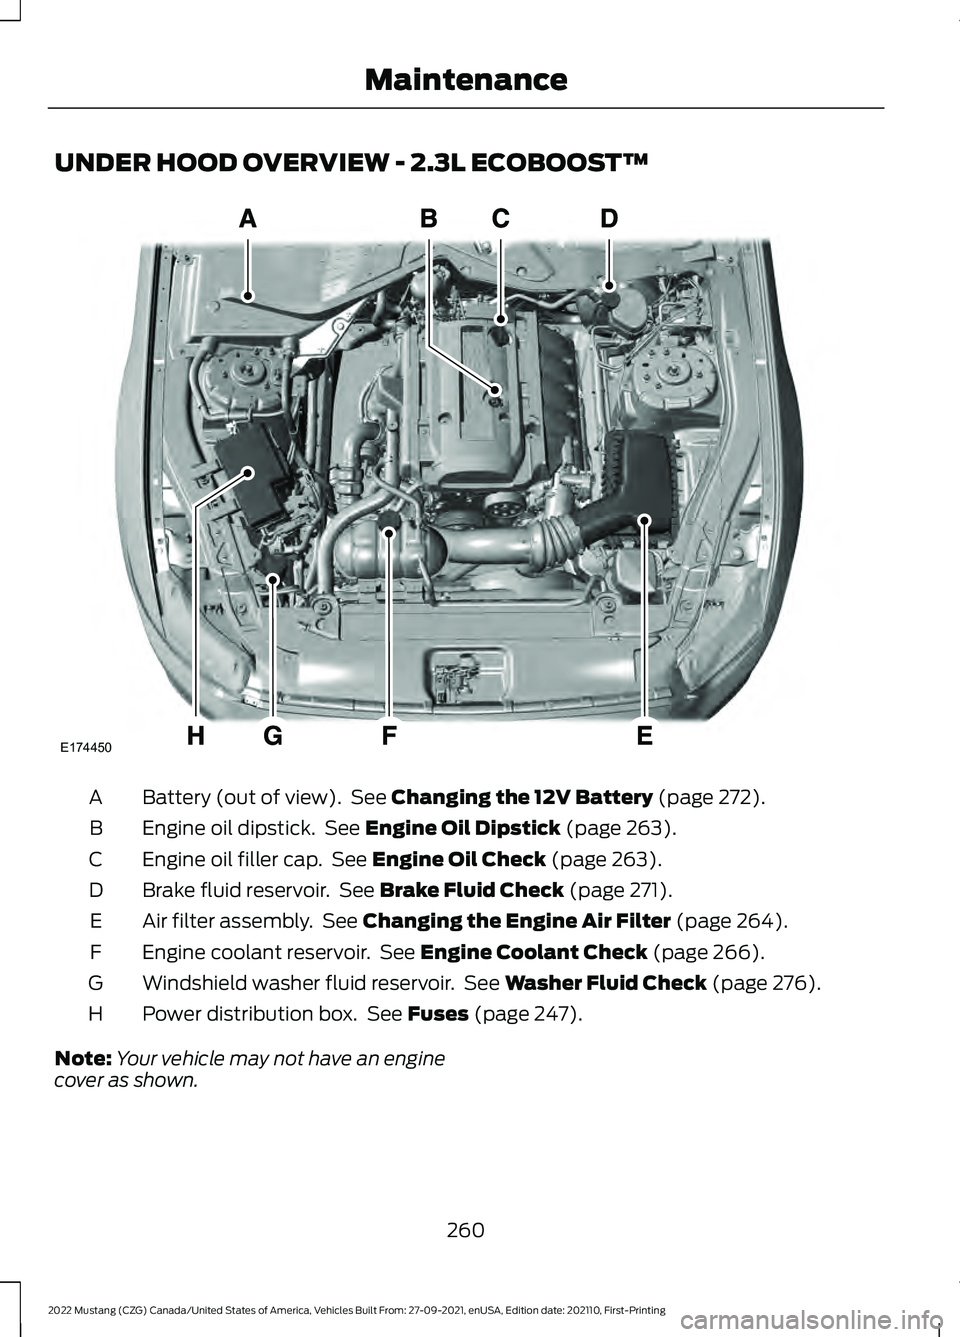 FORD MUSTANG 2022  Owners Manual UNDER HOOD OVERVIEW - 2.3L ECOBOOST™
Battery (out of view).  See Changing the 12V Battery (page 272).
A
Engine oil dipstick.  See 
Engine Oil Dipstick (page 263).
B
Engine oil filler cap.  See 
Engi